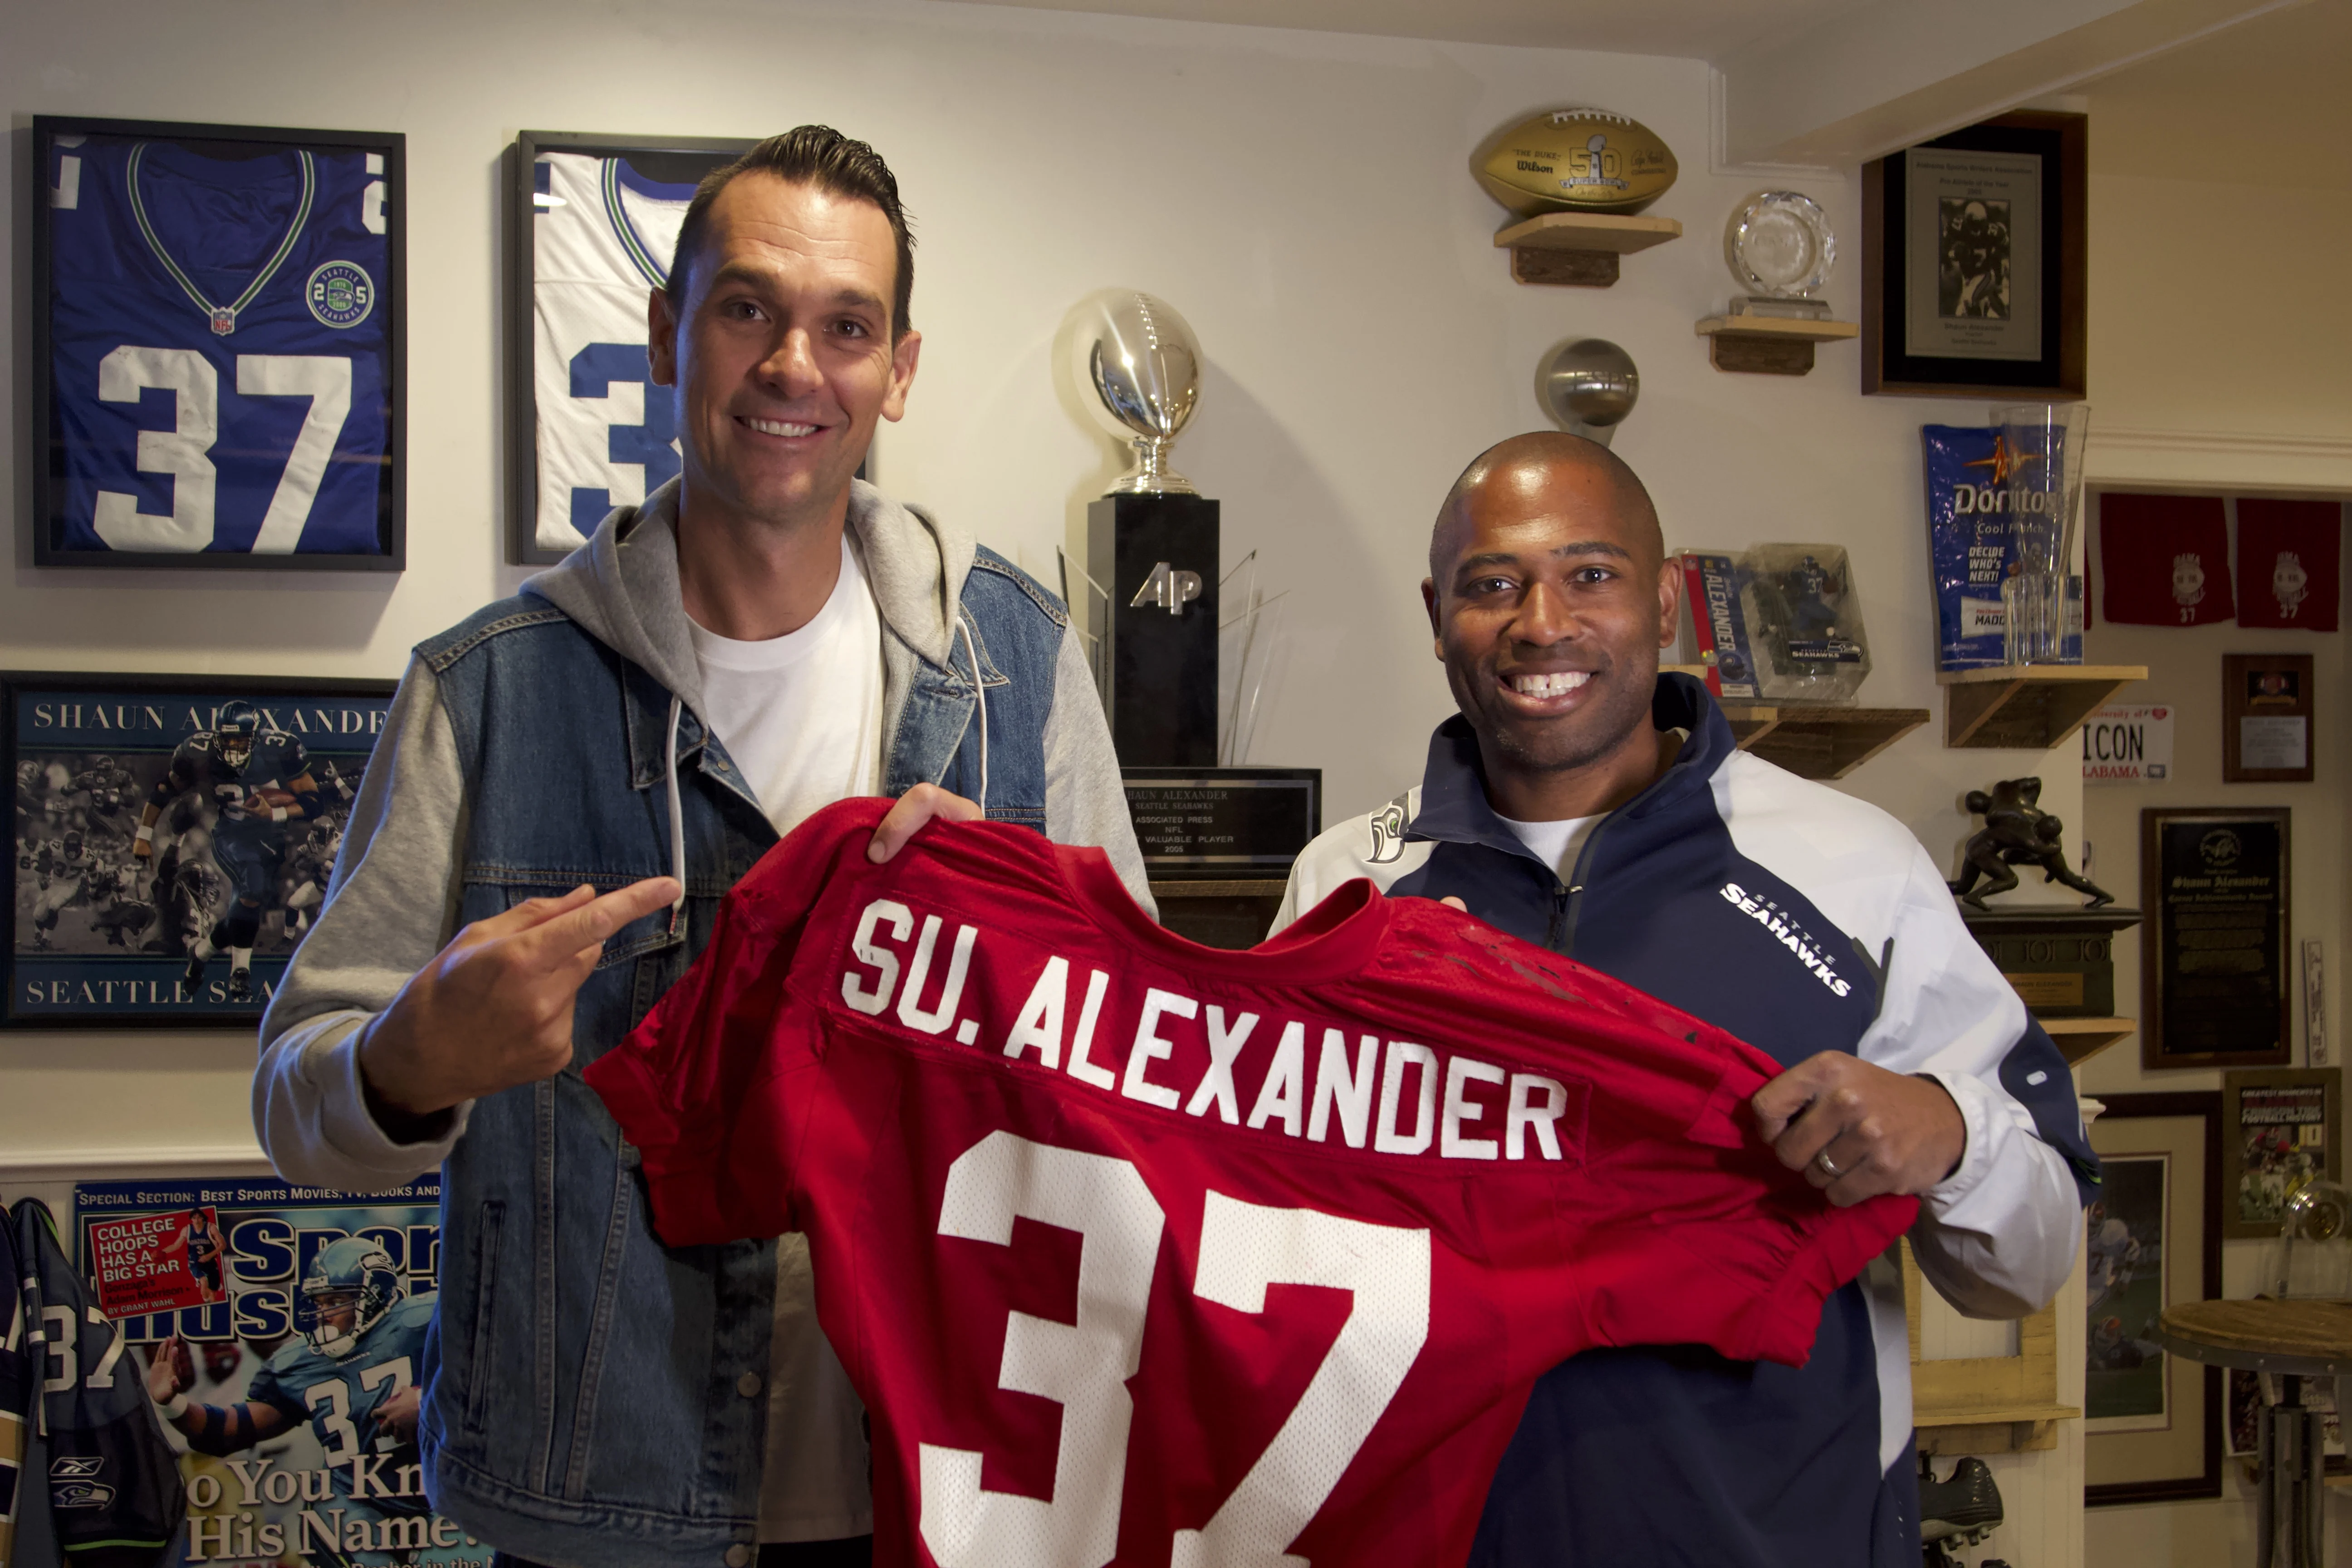 Shaun Alexander in Playing for Eternity